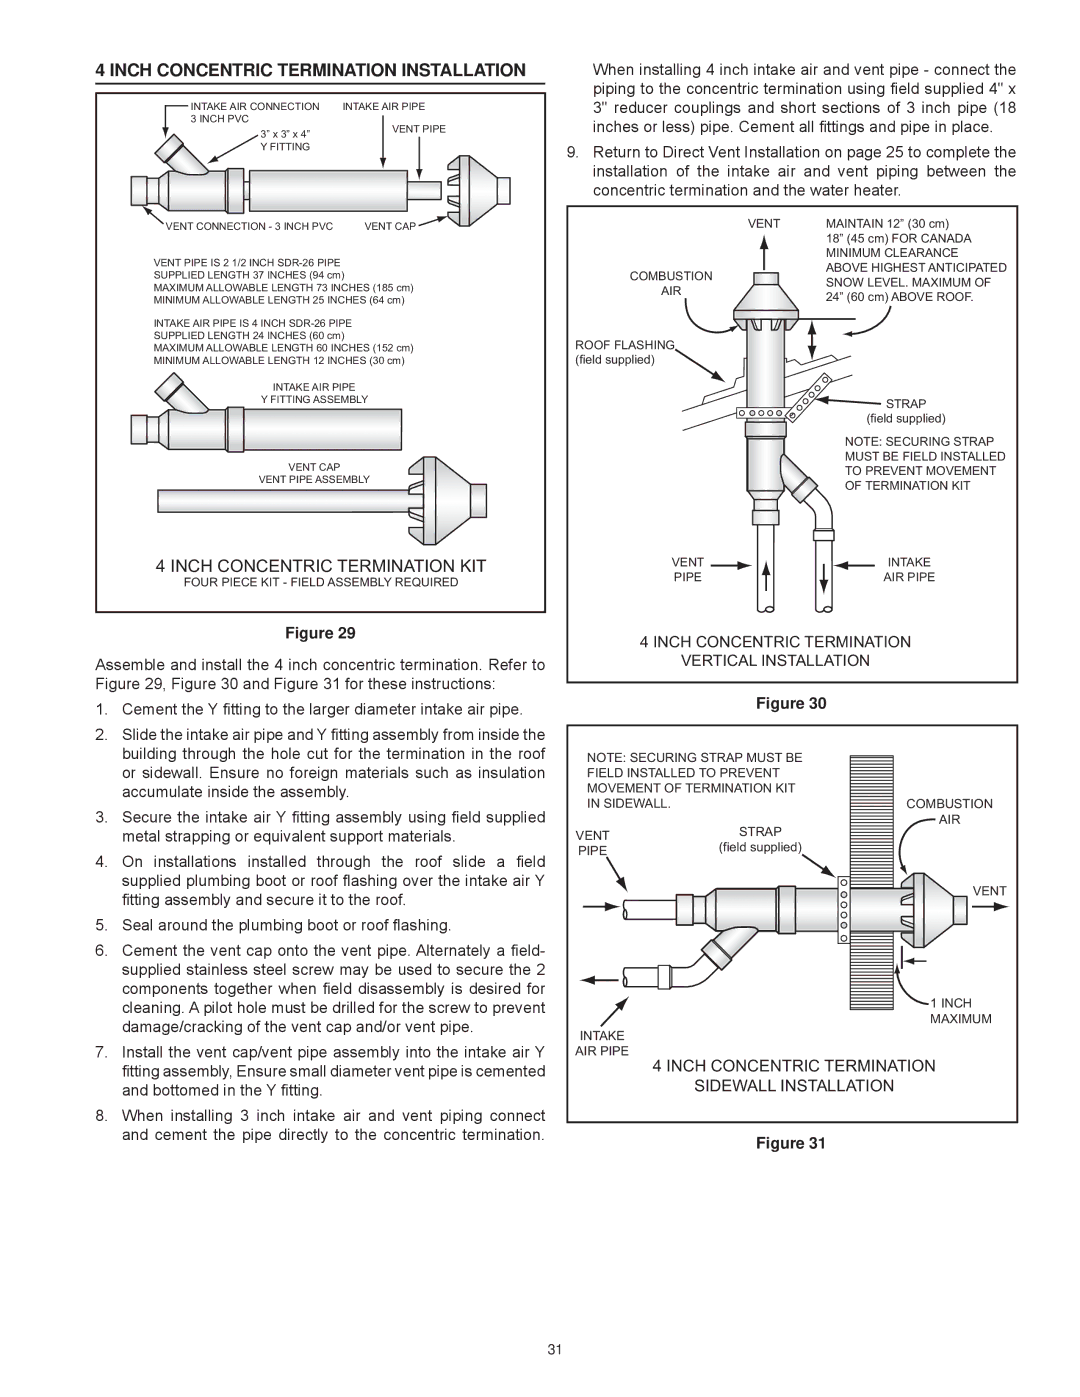 American Water Heater Commercial Gas Water Heaters instruction manual Inch Concentric Termination Installation 